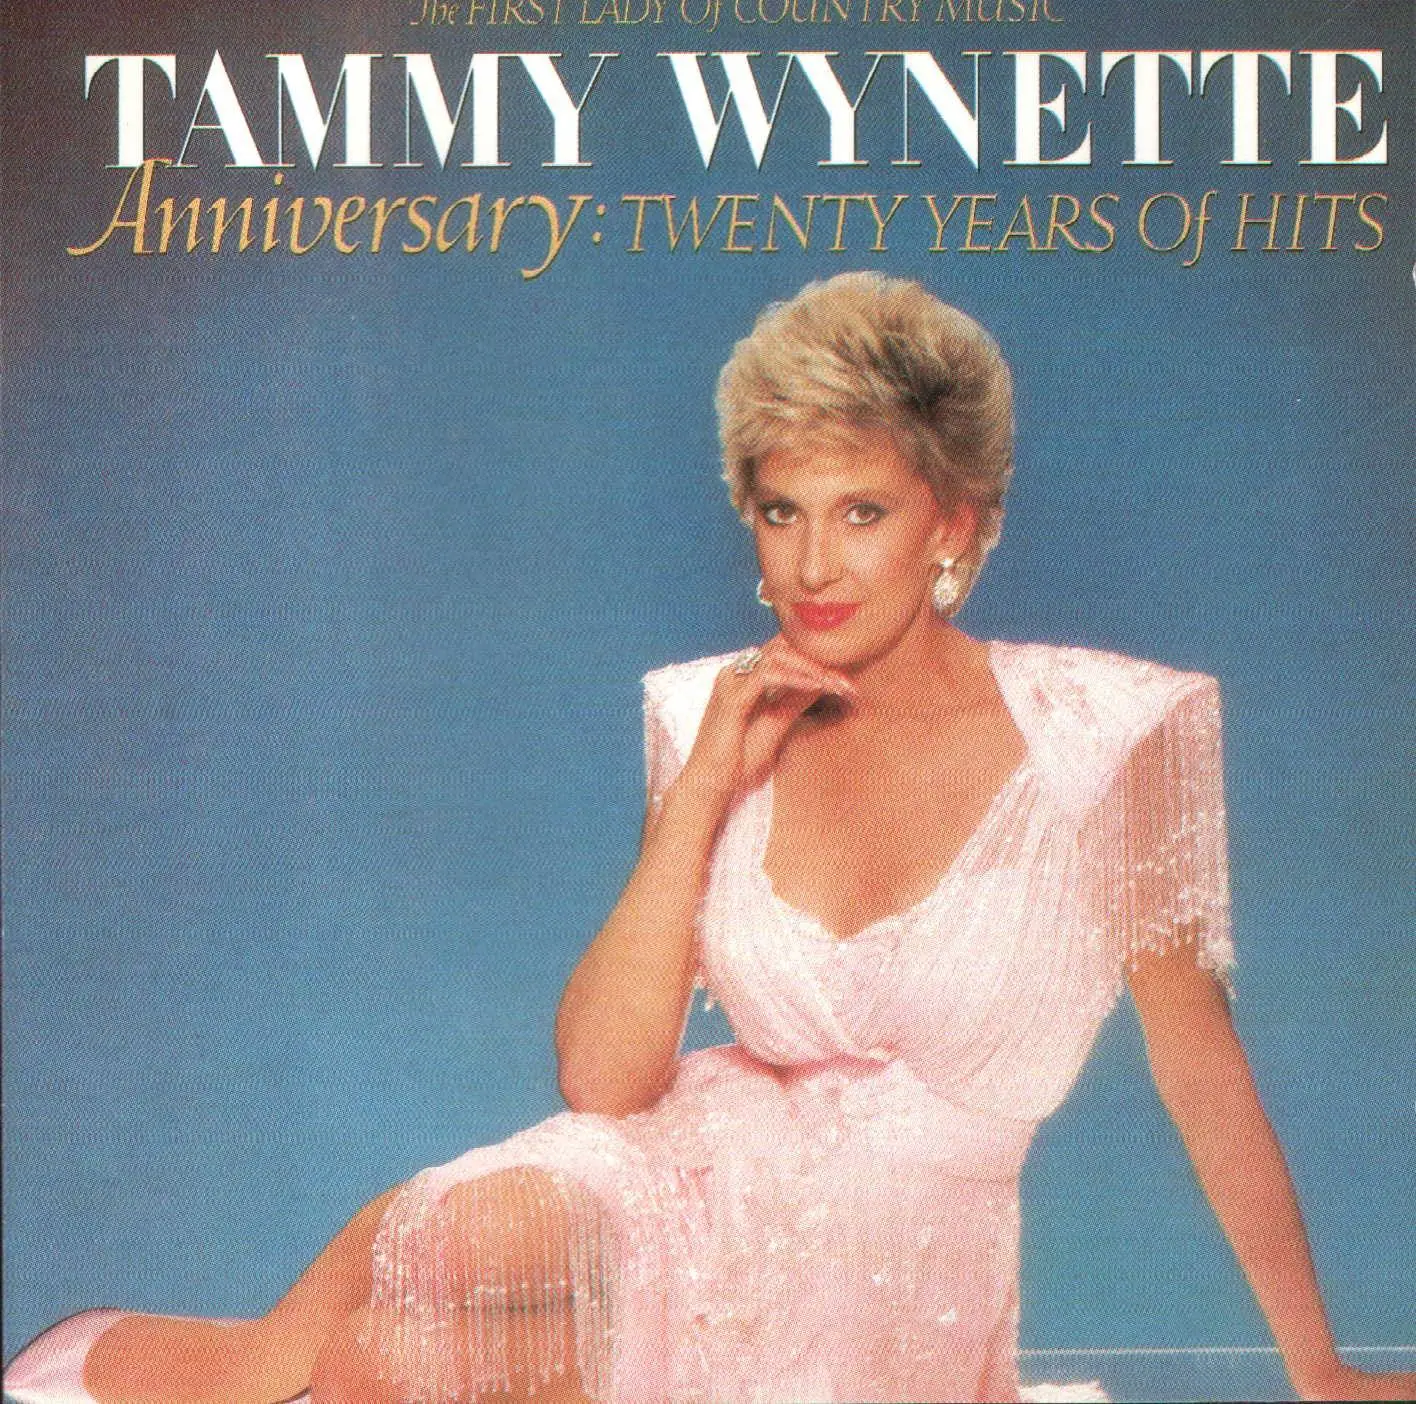 Show me pictures of tammy wynette